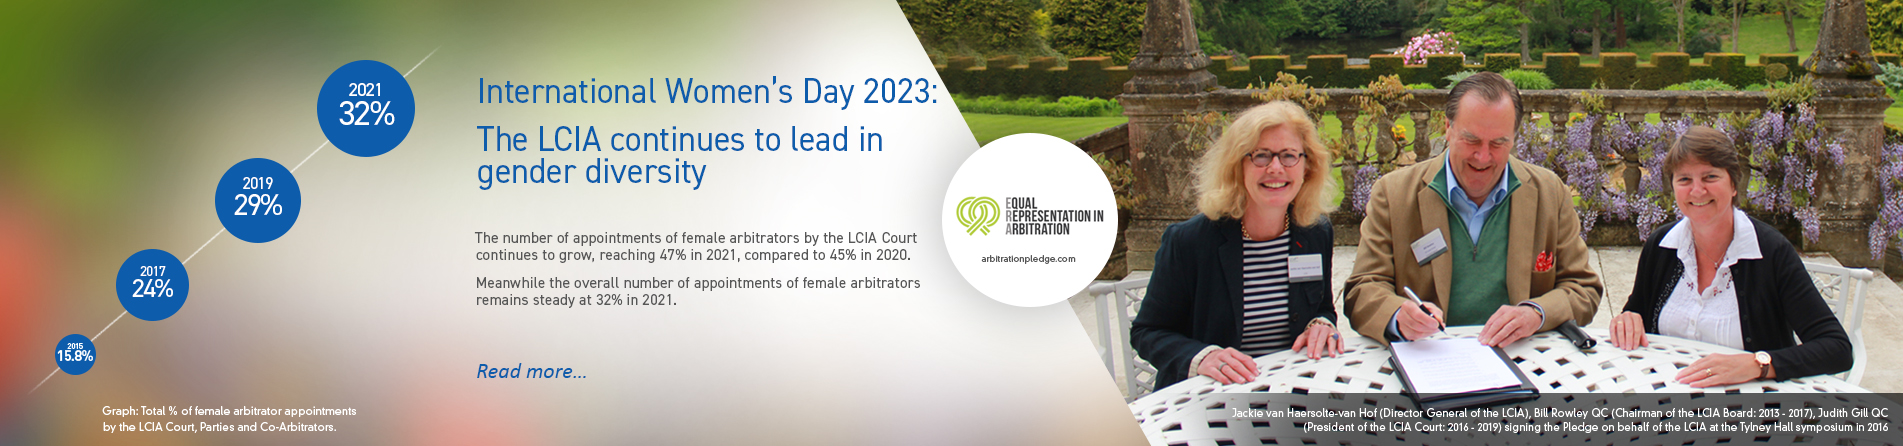 International Women's Day 2023: The LCIA Continues to Lead in Gender Diversity